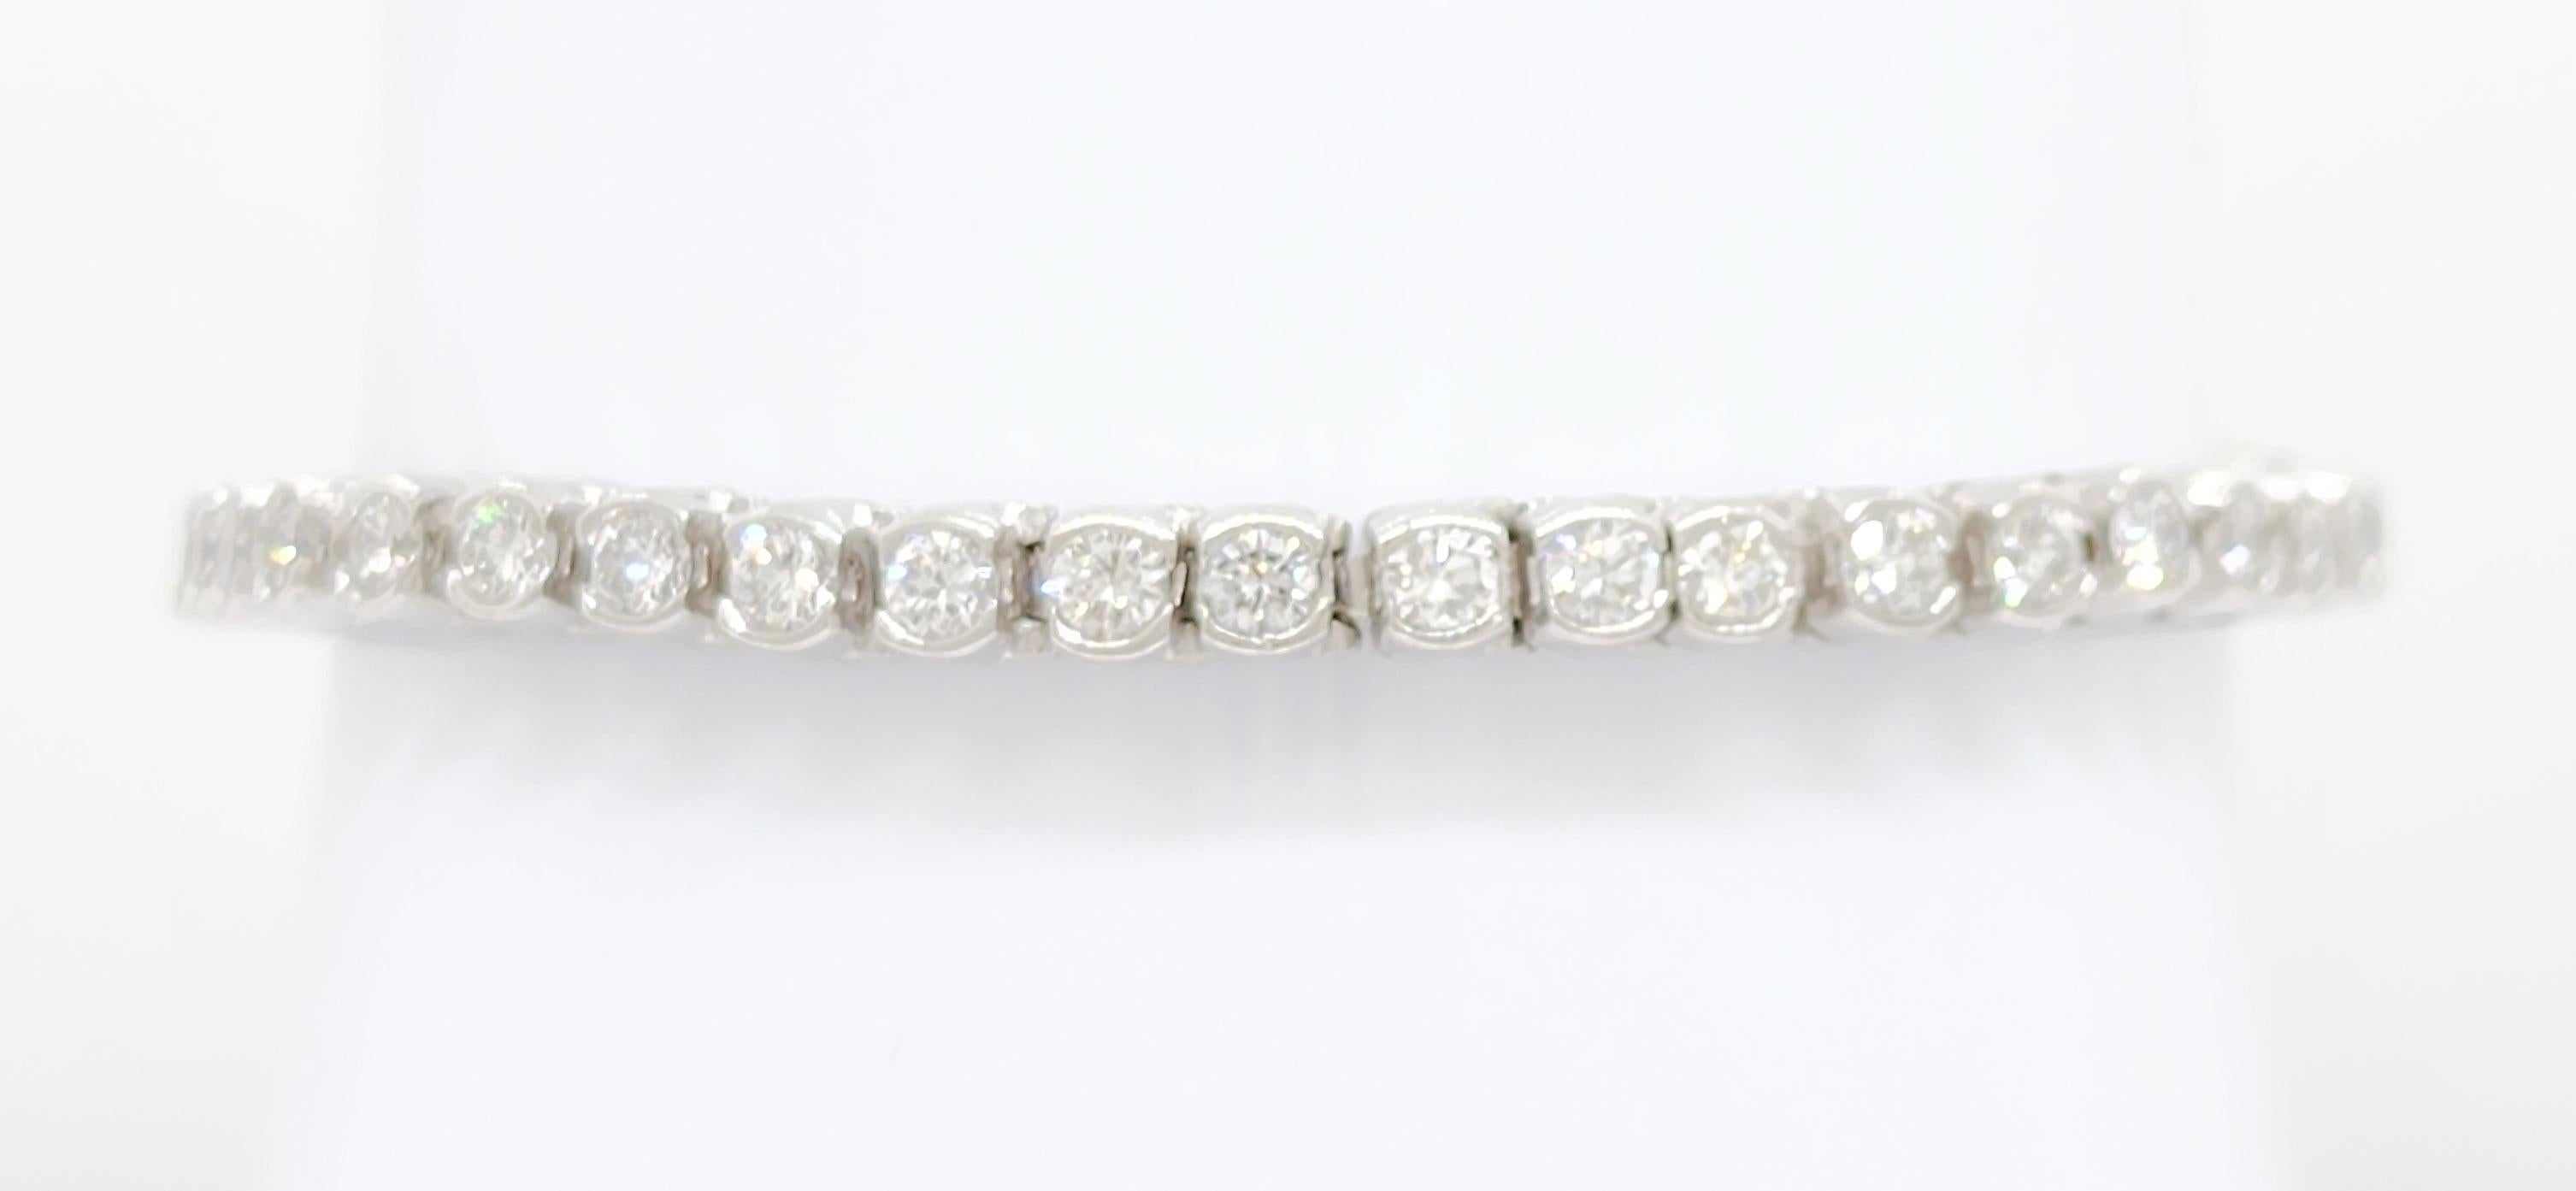 Beautiful 3.00 ct. white diamond rounds in a handmade 14k white gold mounting.  Half bezel set diamonds give this bracelet a different look than the traditional prong set diamonds in a tennis bracelet.  Great for layering or wearing on its own.